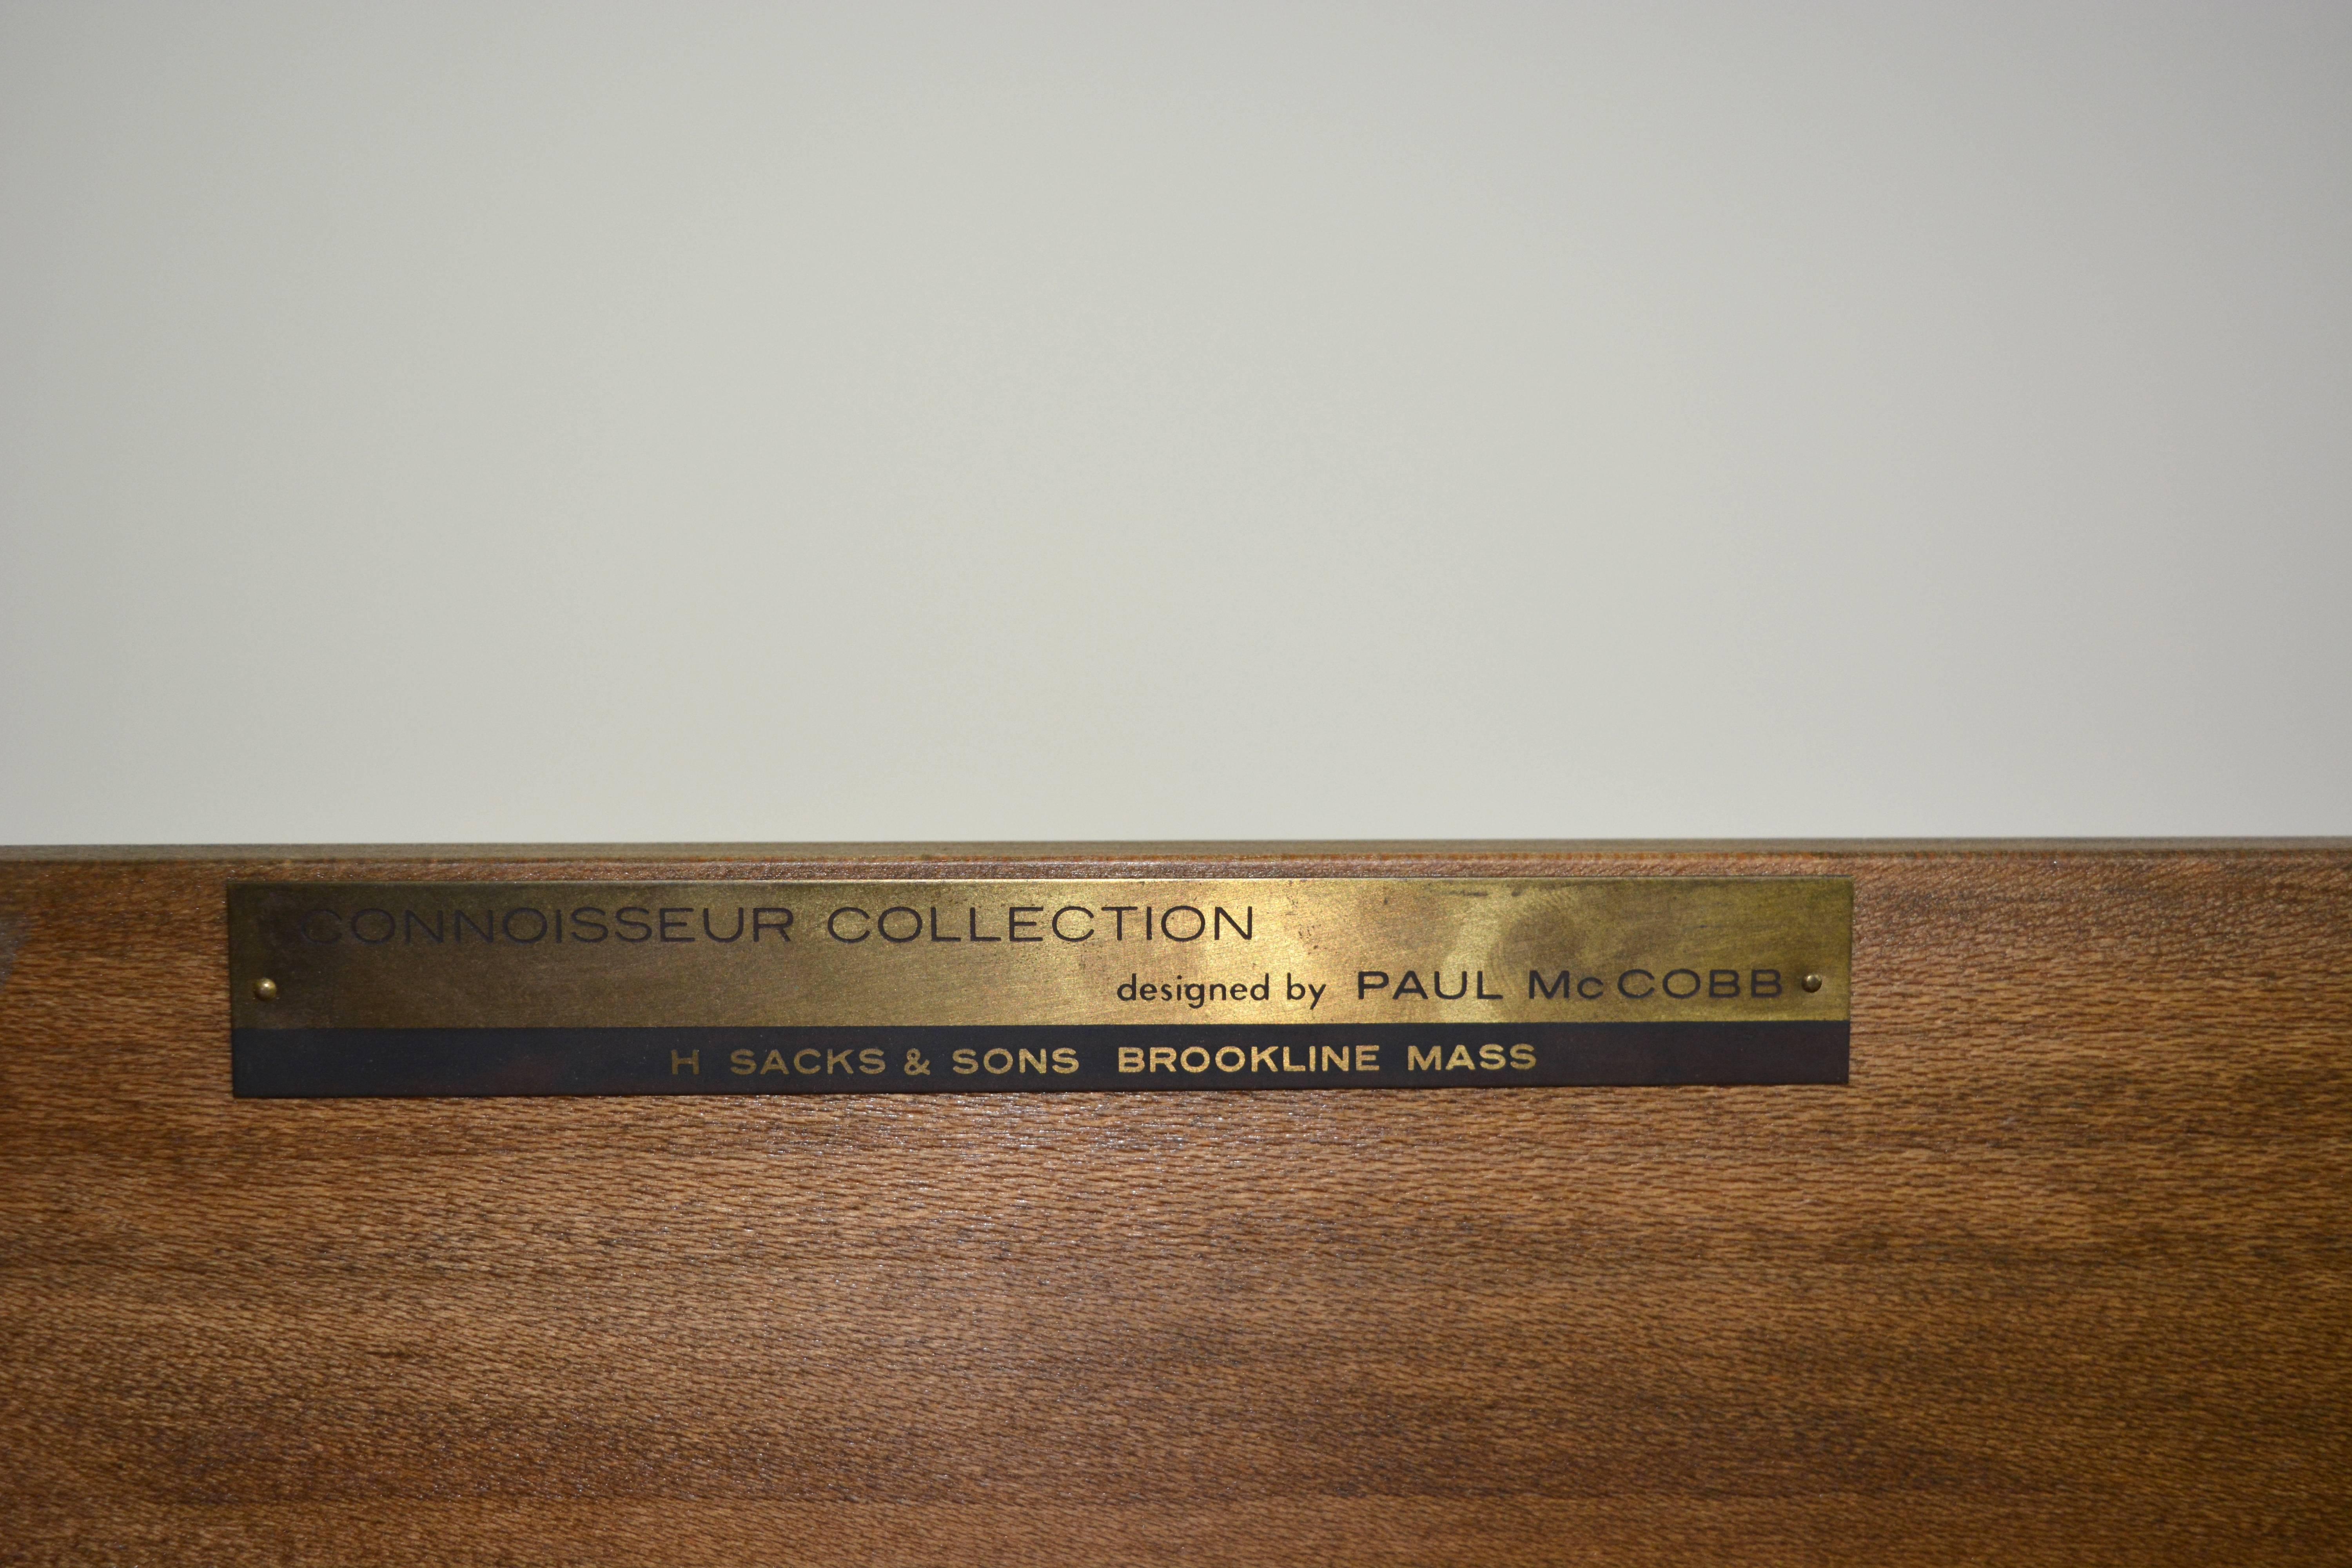 Paul McCobb Connoisseur Collection Bar Cabinet In Excellent Condition For Sale In San Diego, CA